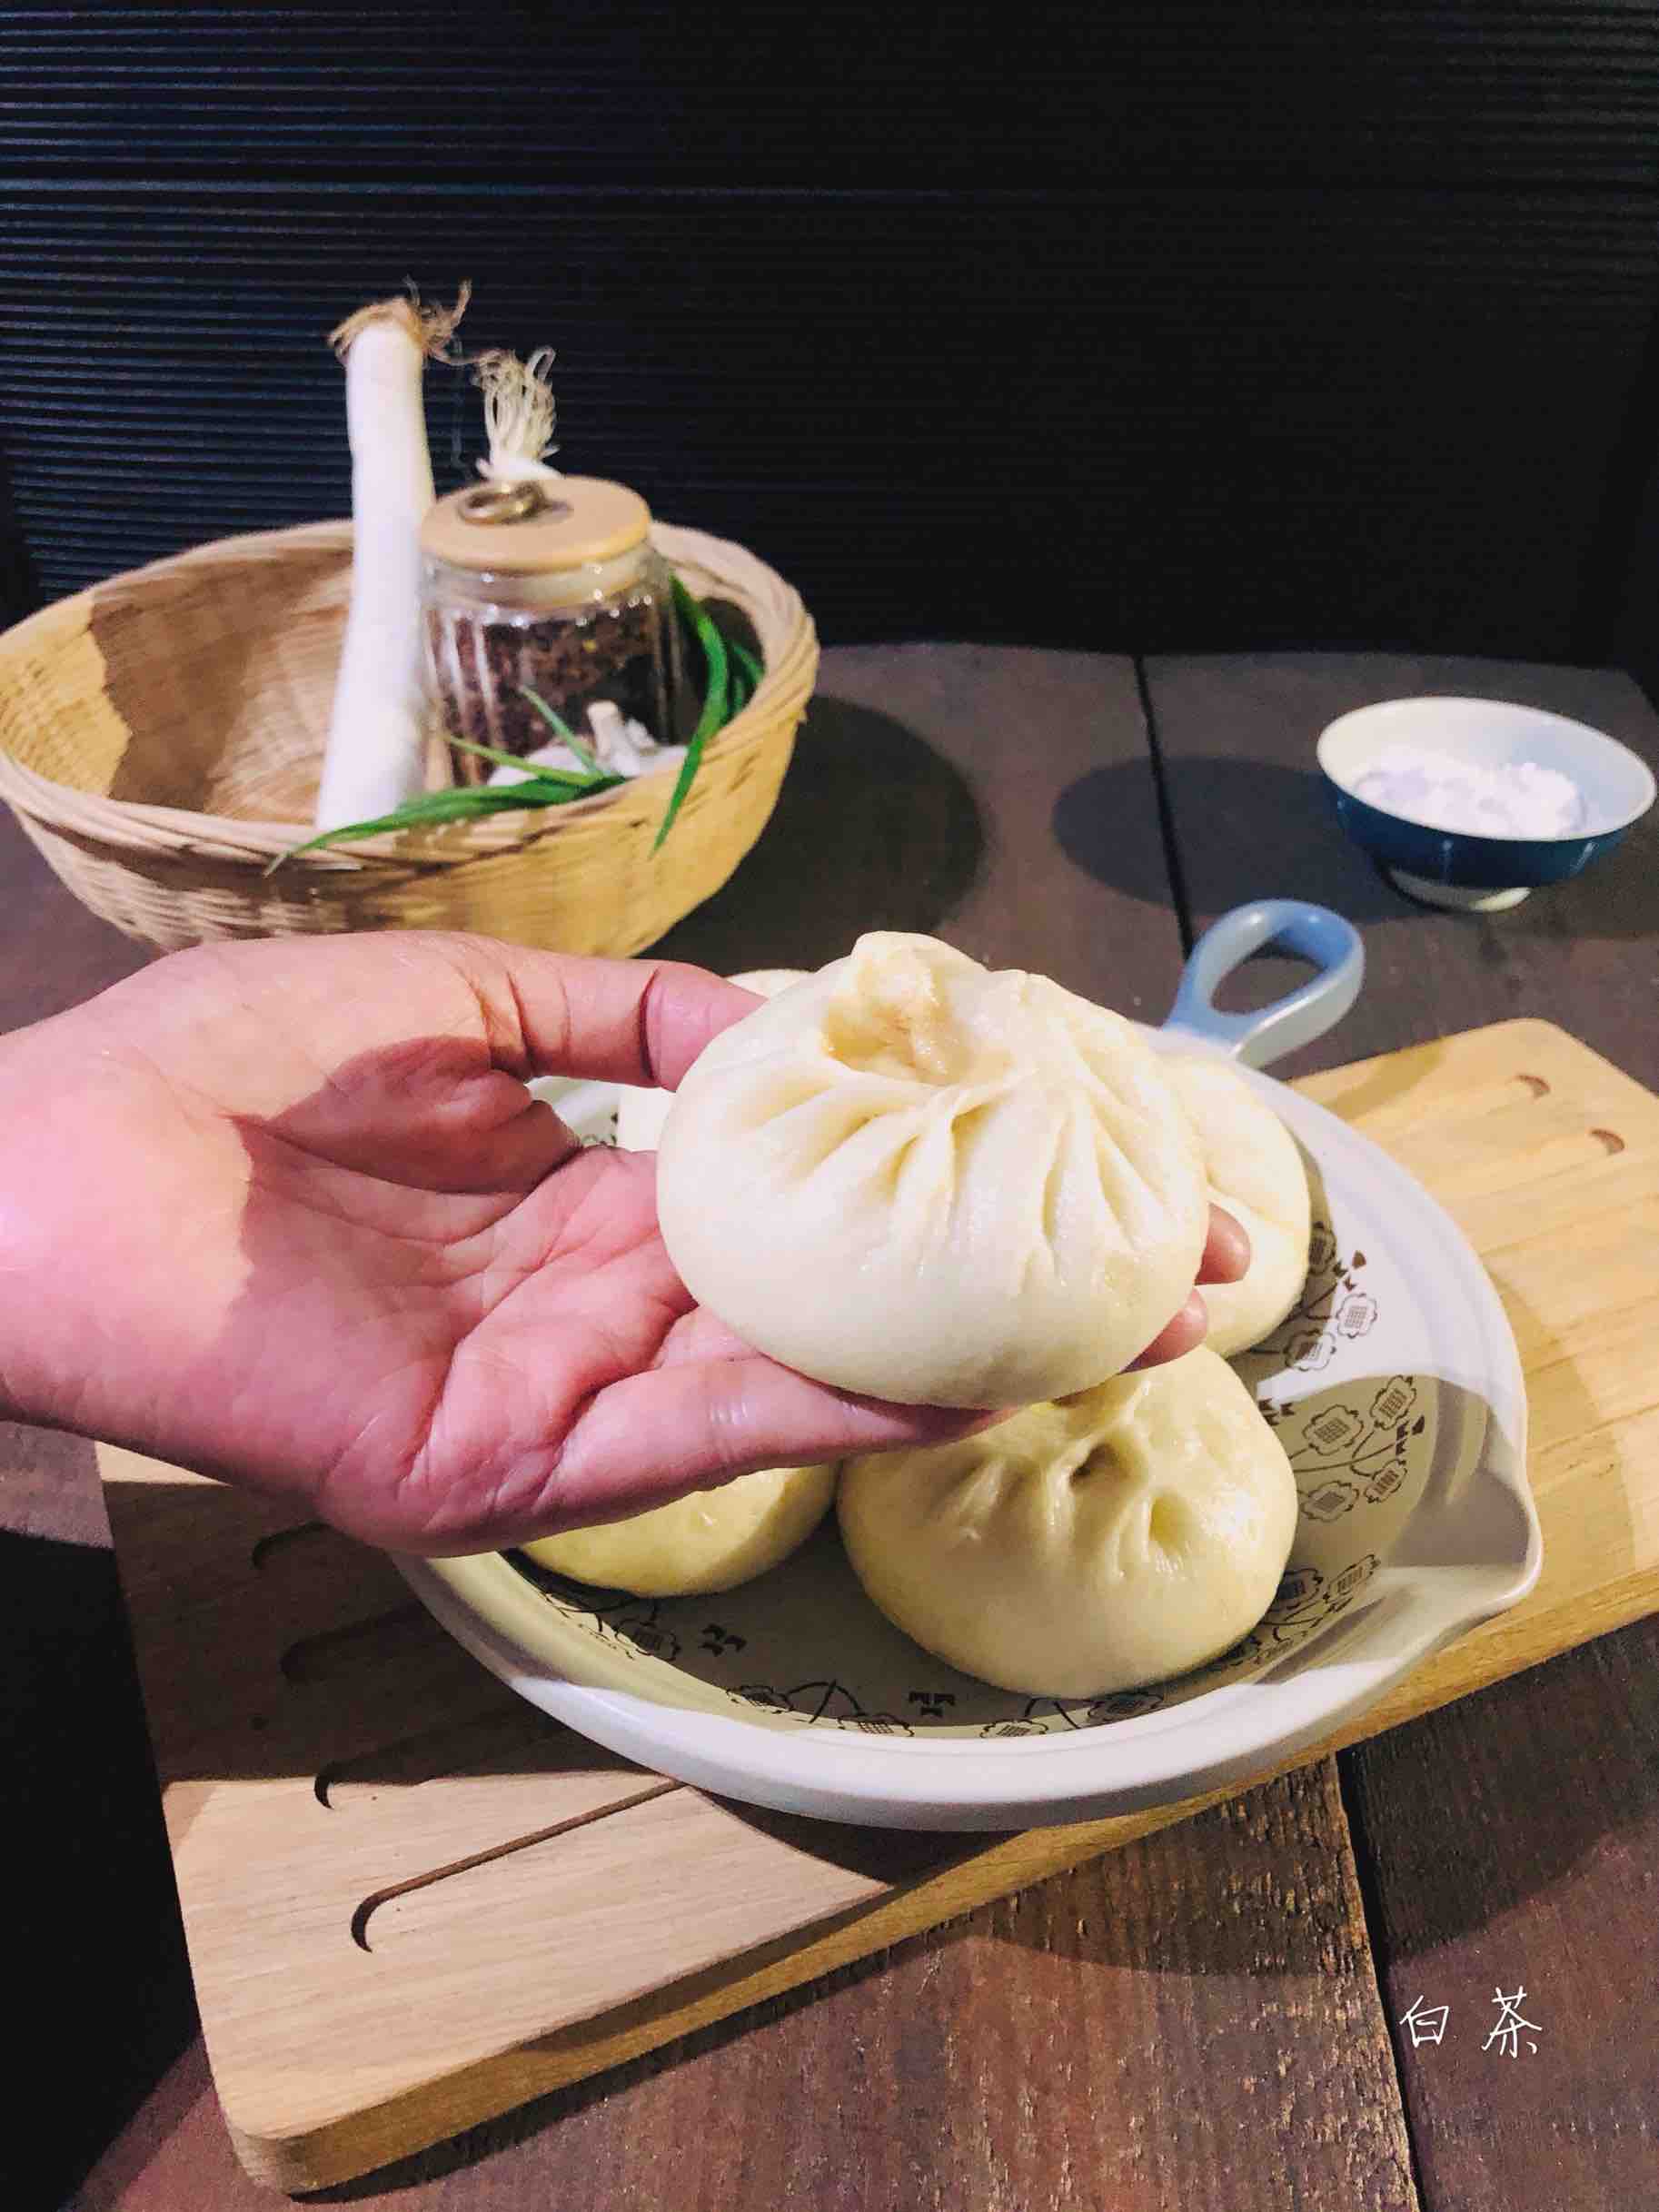 Delicious and Juicy Big Meat Buns